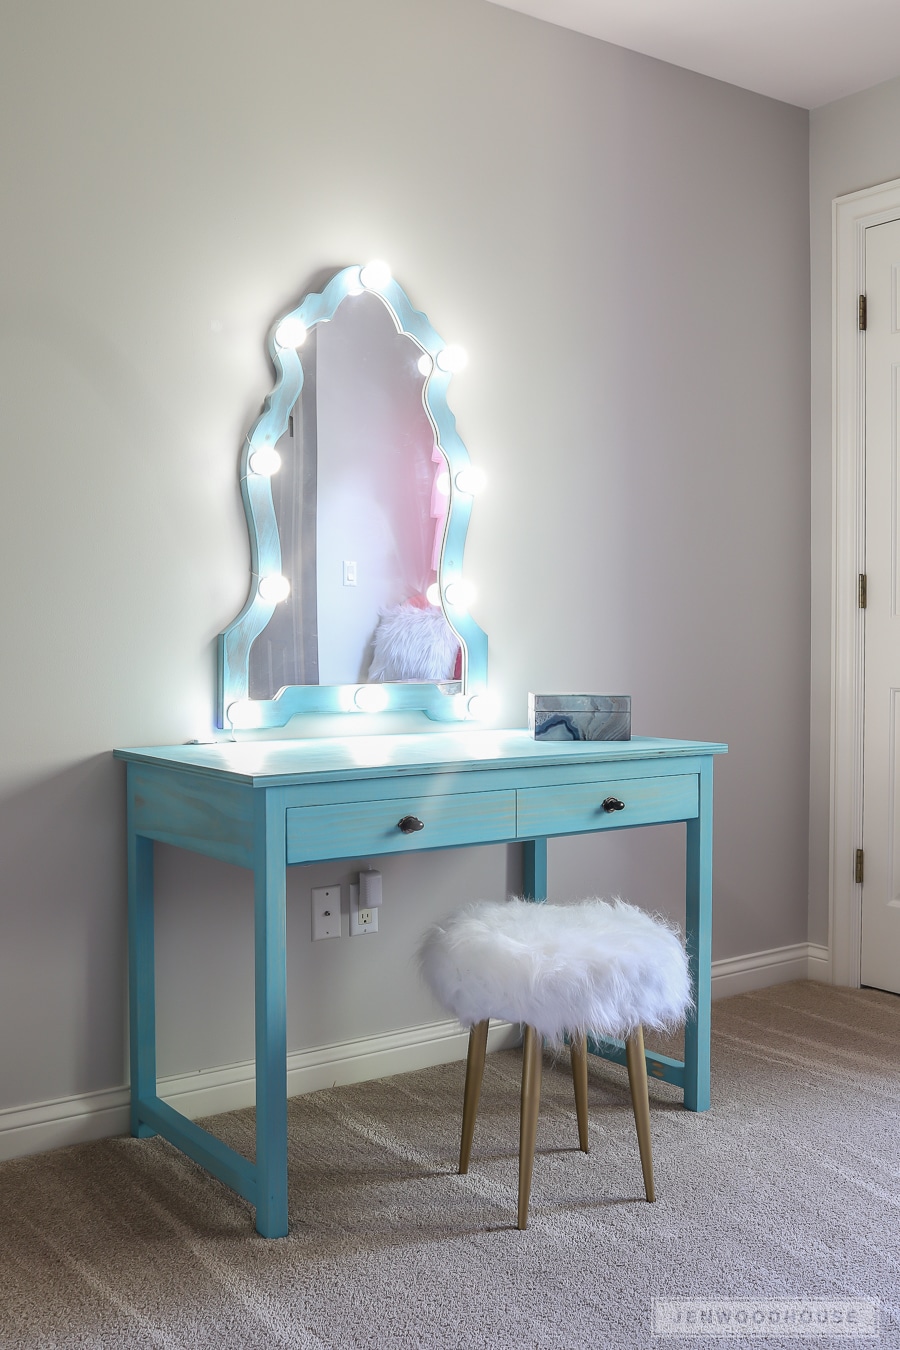 How to build a DIY makeup vanity with lights - desk with drawers